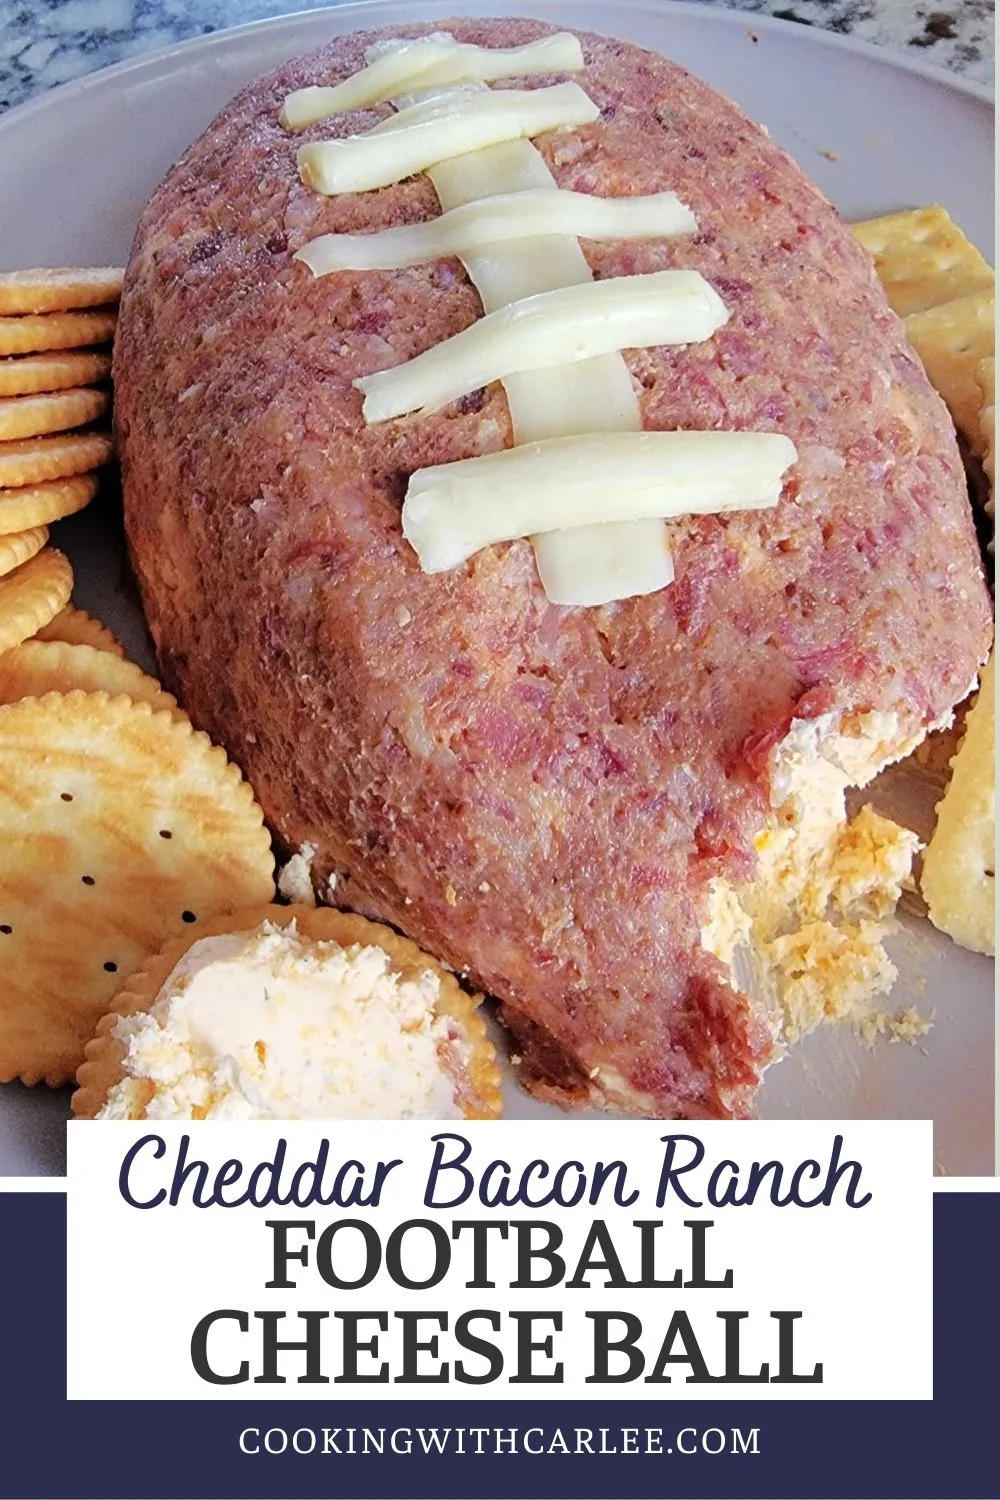 This pigskin cheese ball is sure to score with your family and friends. Bacon, cheddar and ranch come together in this football shaped treat. Perfect for the big game or any get together!